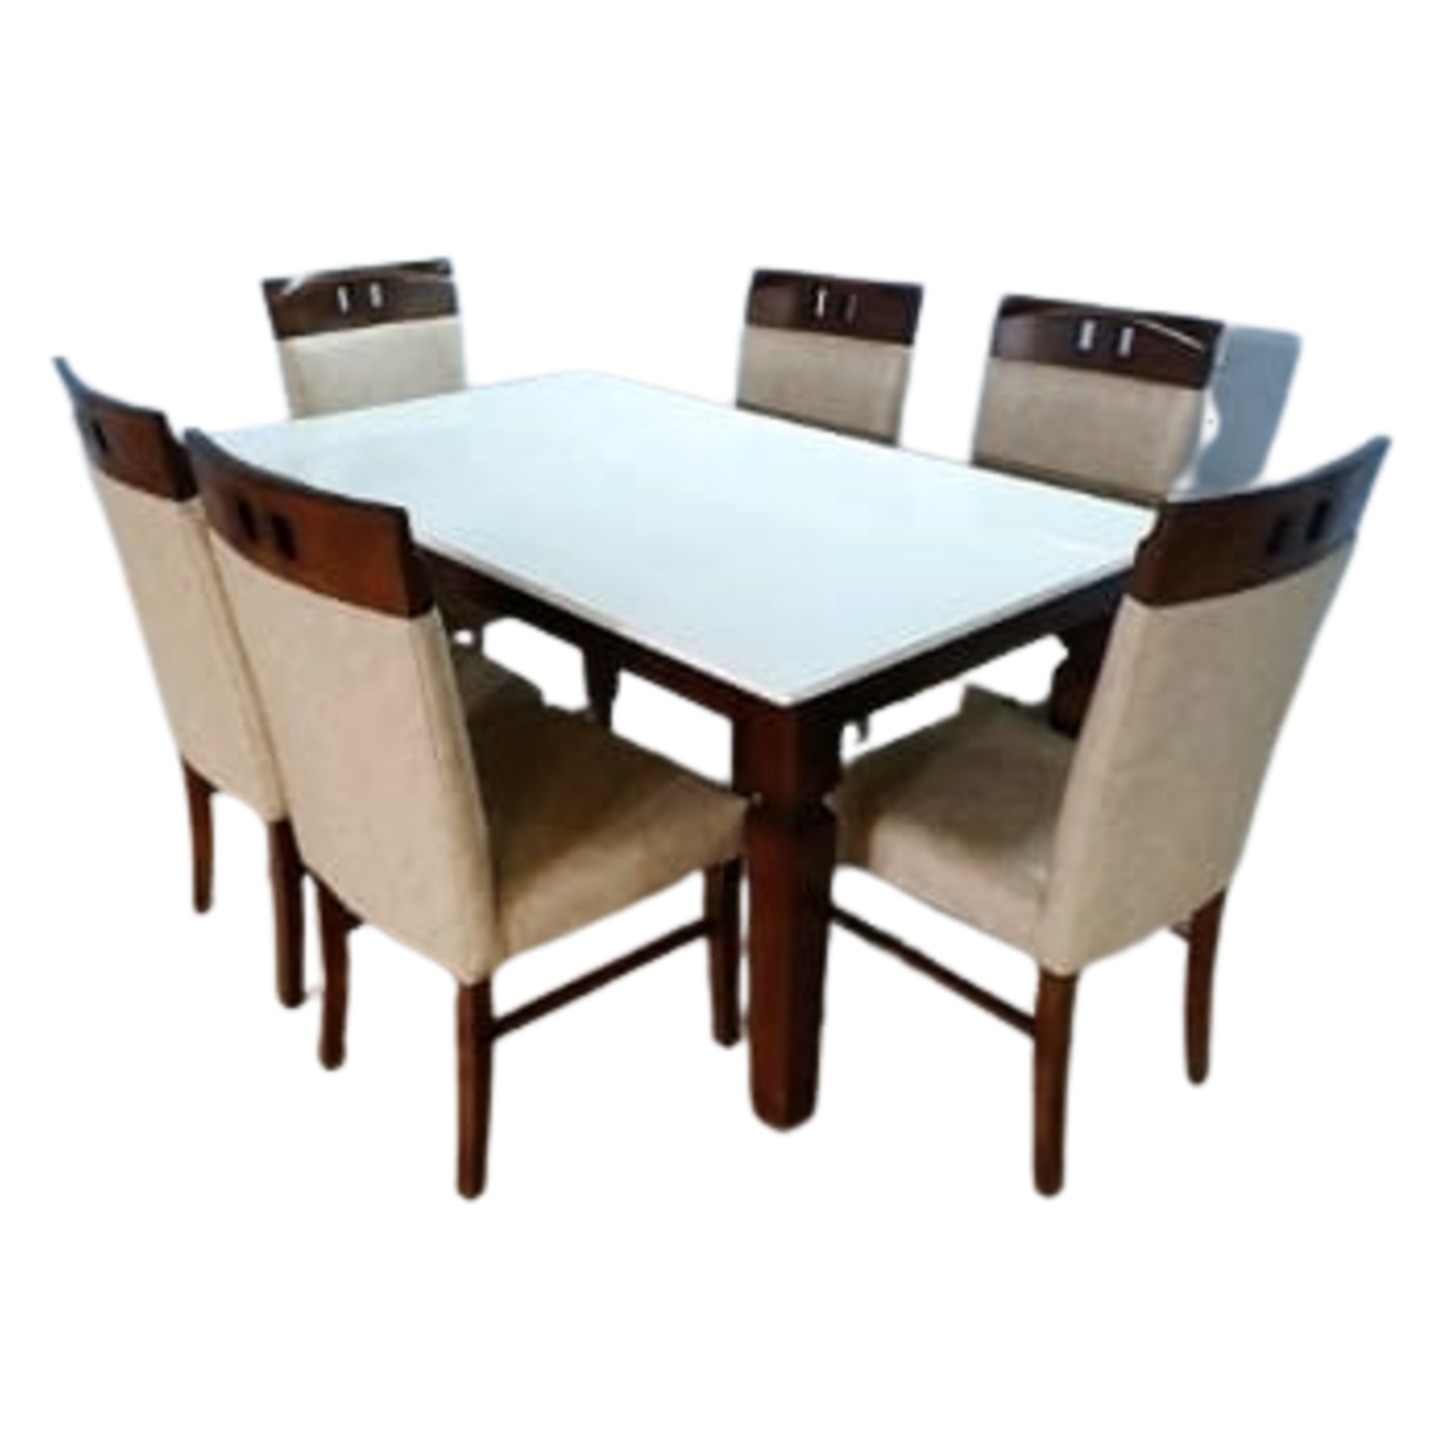 DW Marble Top H-001  Four Seater Dining Table Set in Brown Colour